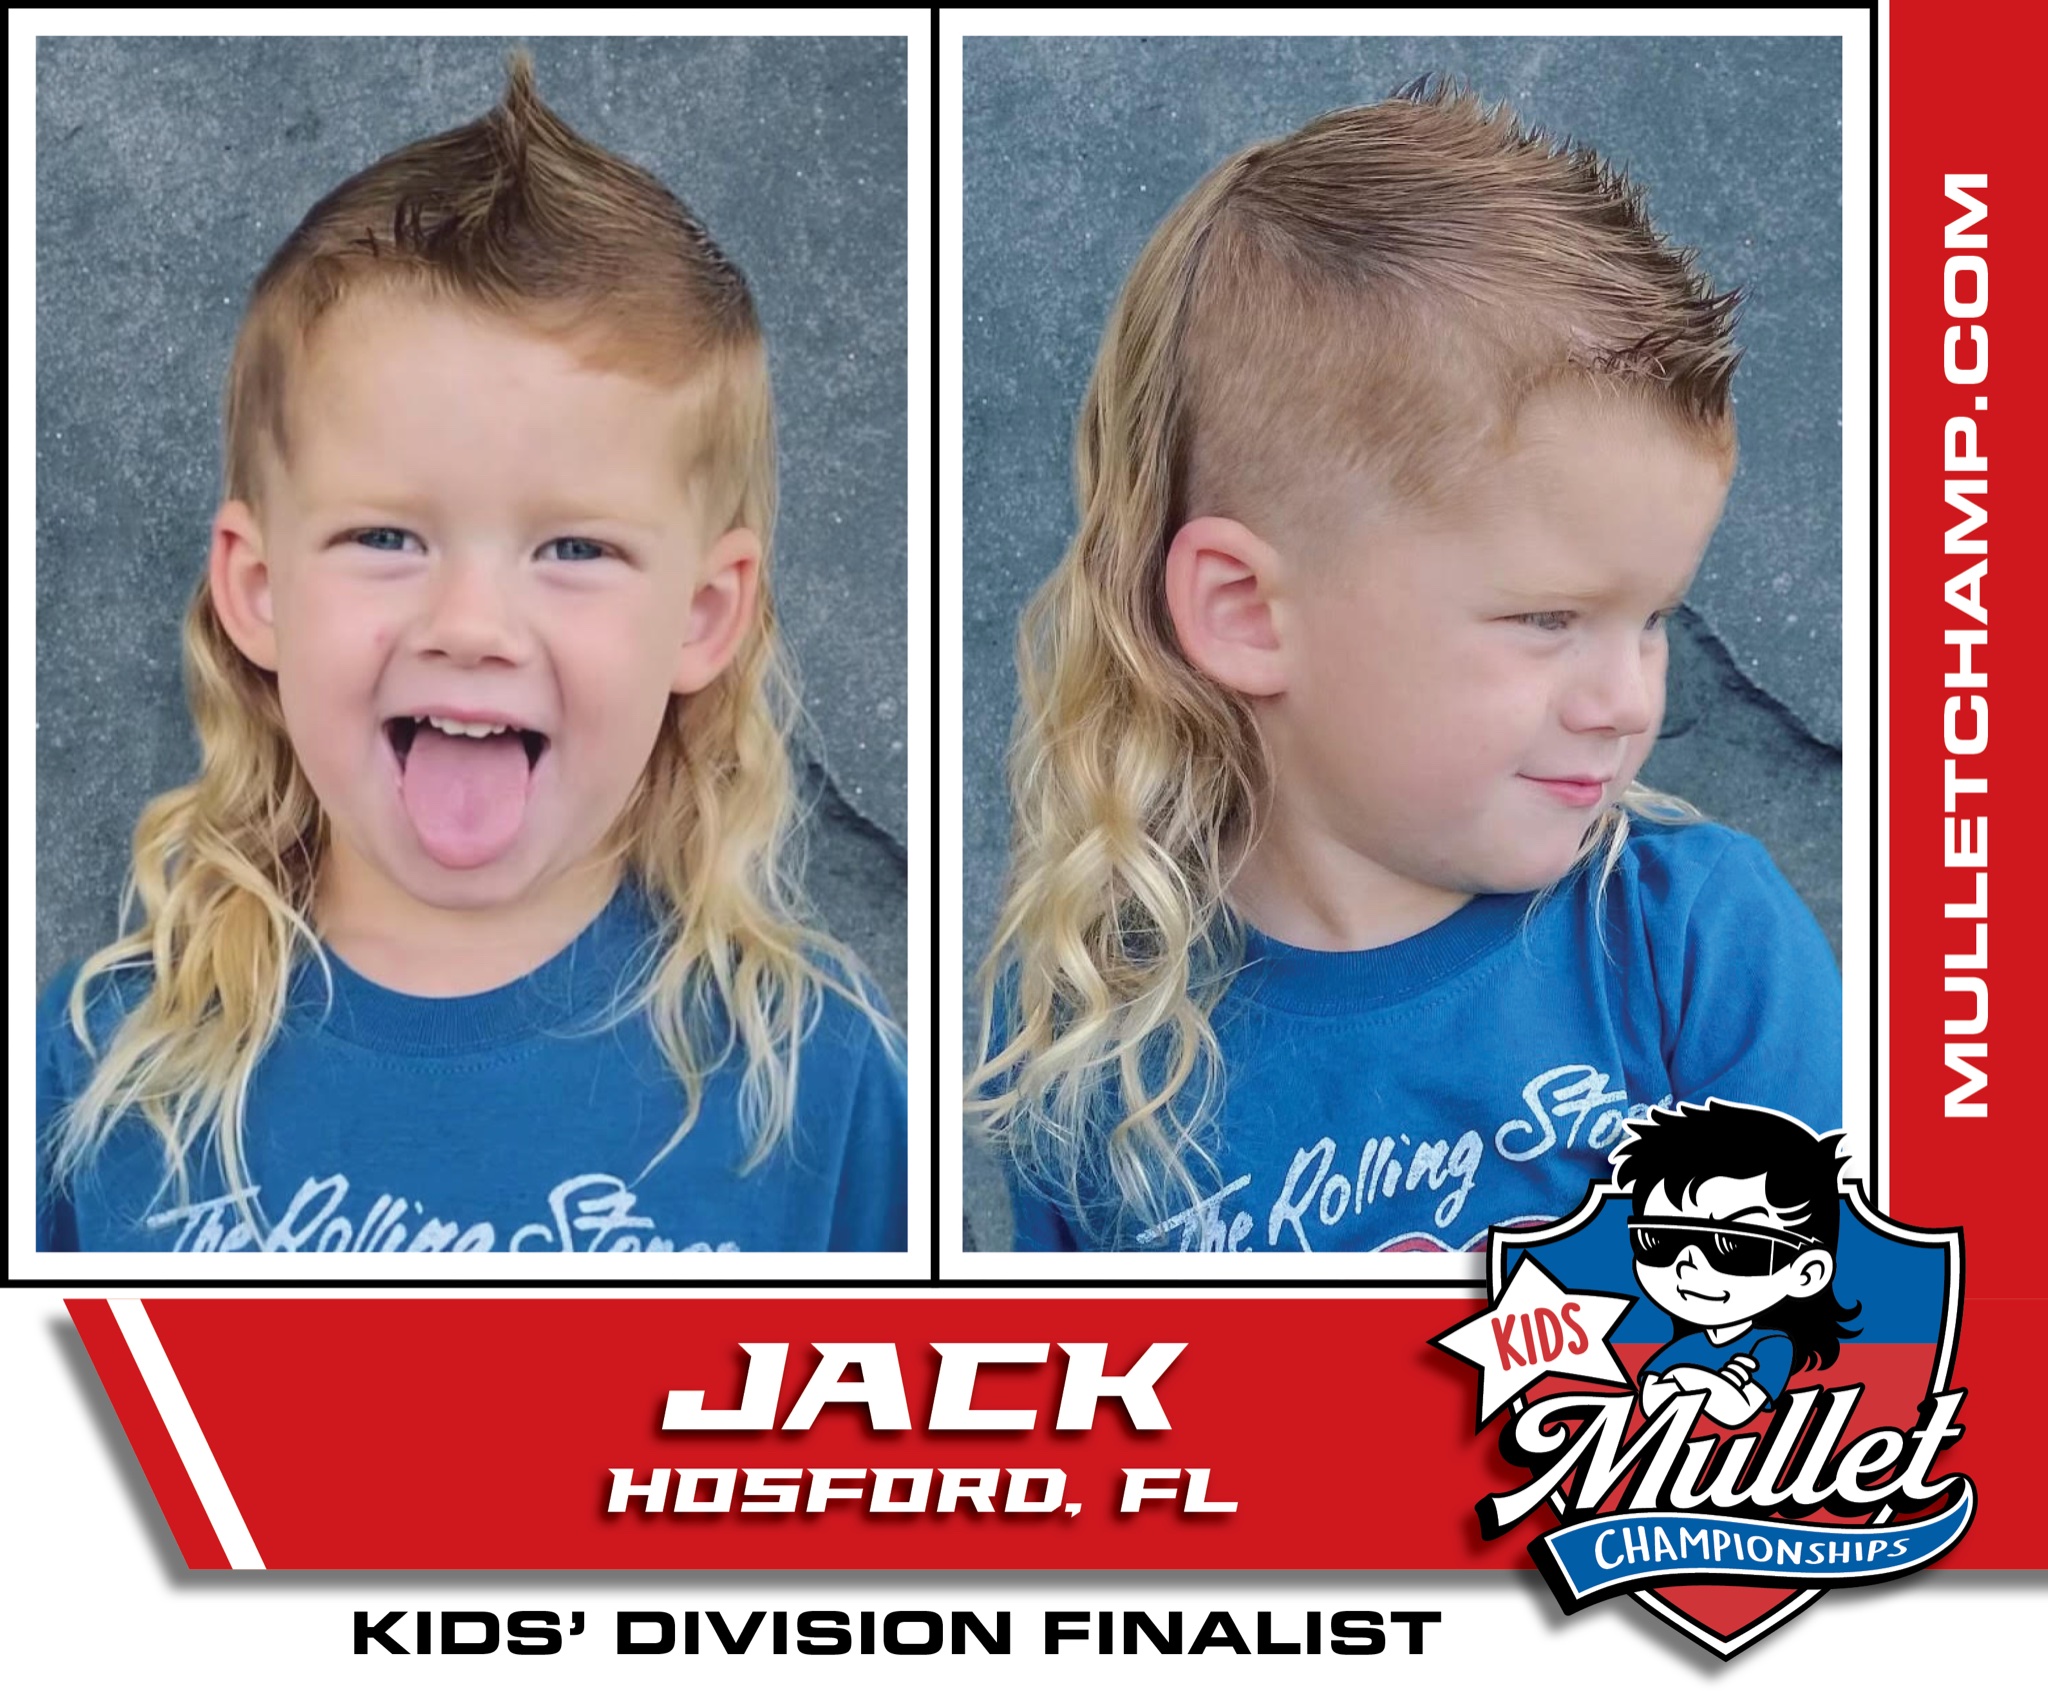 Pennsylvania 6-year-old crowned 2023 kids mullet champion